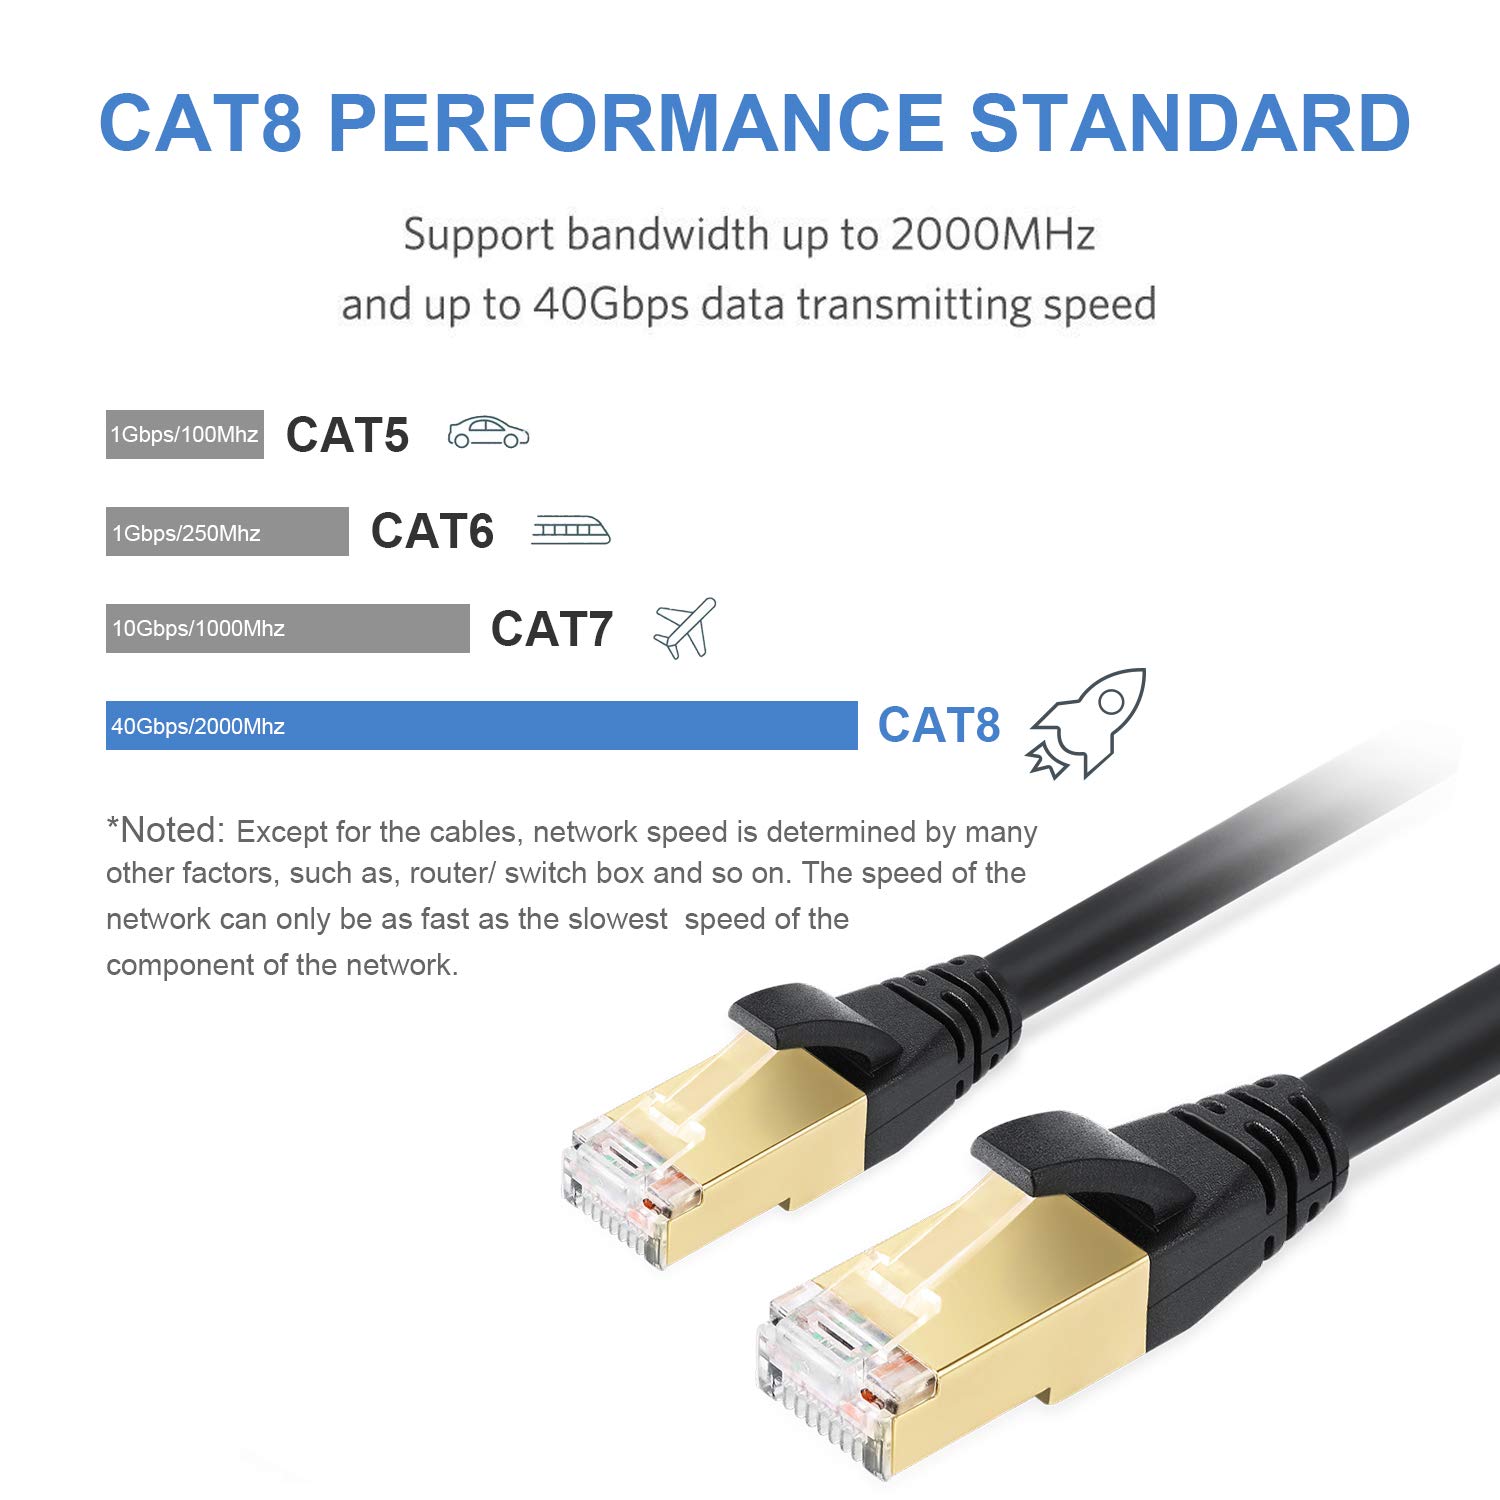 Cat8 Ethernet Cable, Shielded for Outdoor&Indoor, 15FT Heavy Duty High Speed 26AWG Cat8 LAN Cable, Weatherproof, with Gold Plated RJ45 Connector, 40Gbps 2000Mhz Compatitable for Router/Gaming/Xbox